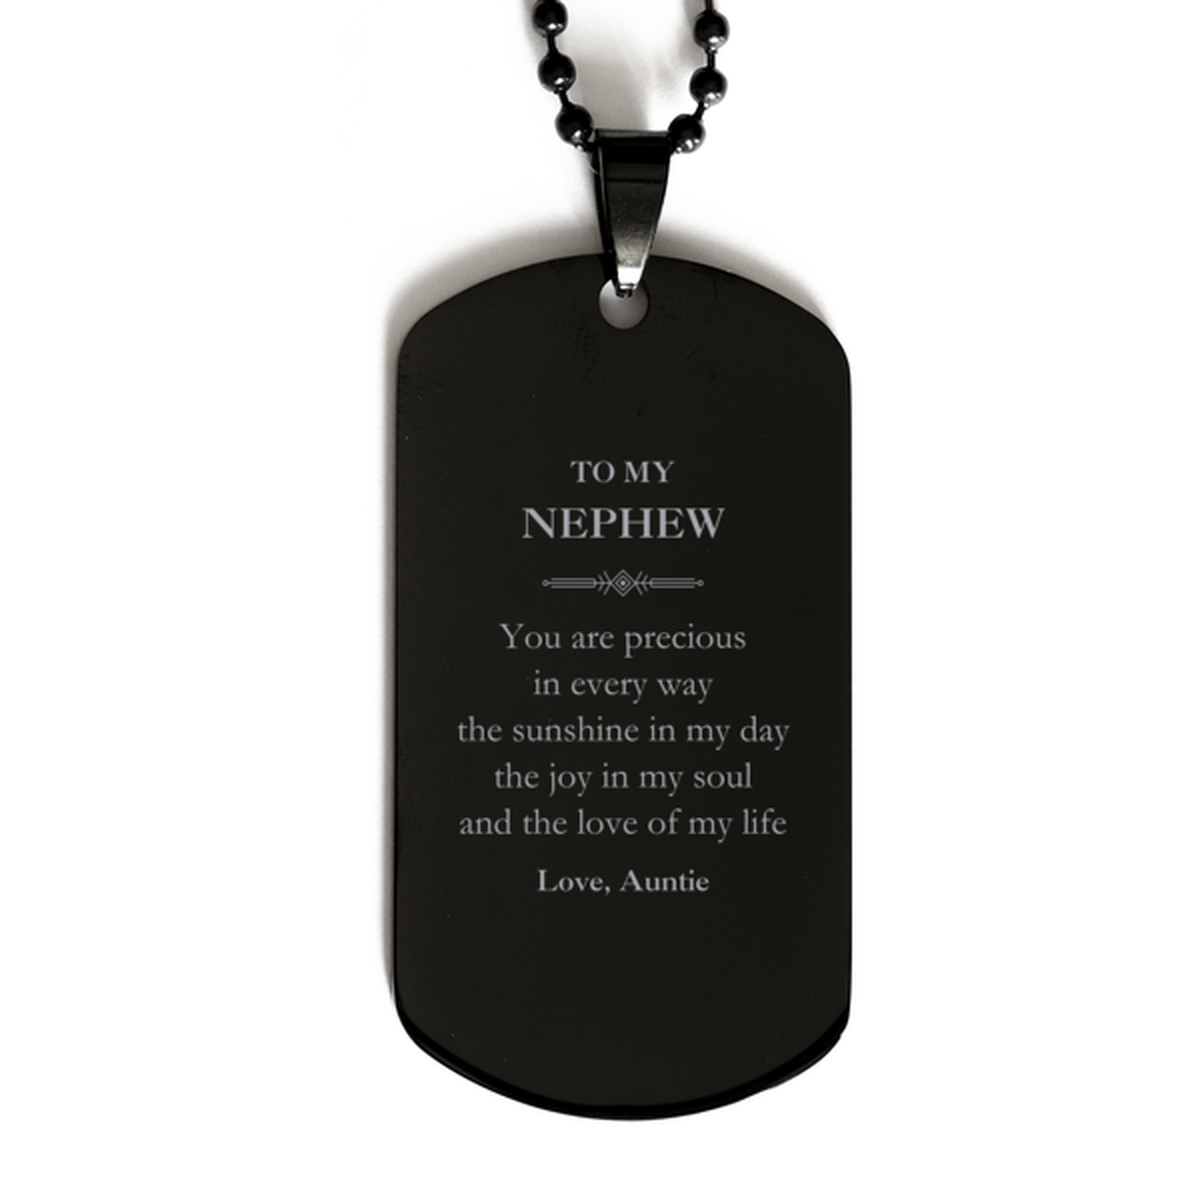 Graduation Gifts for Nephew Black Dog Tag Present from Auntie, Christmas Nephew Birthday Gifts Nephew You are precious in every way the sunshine in my day. Love, Auntie